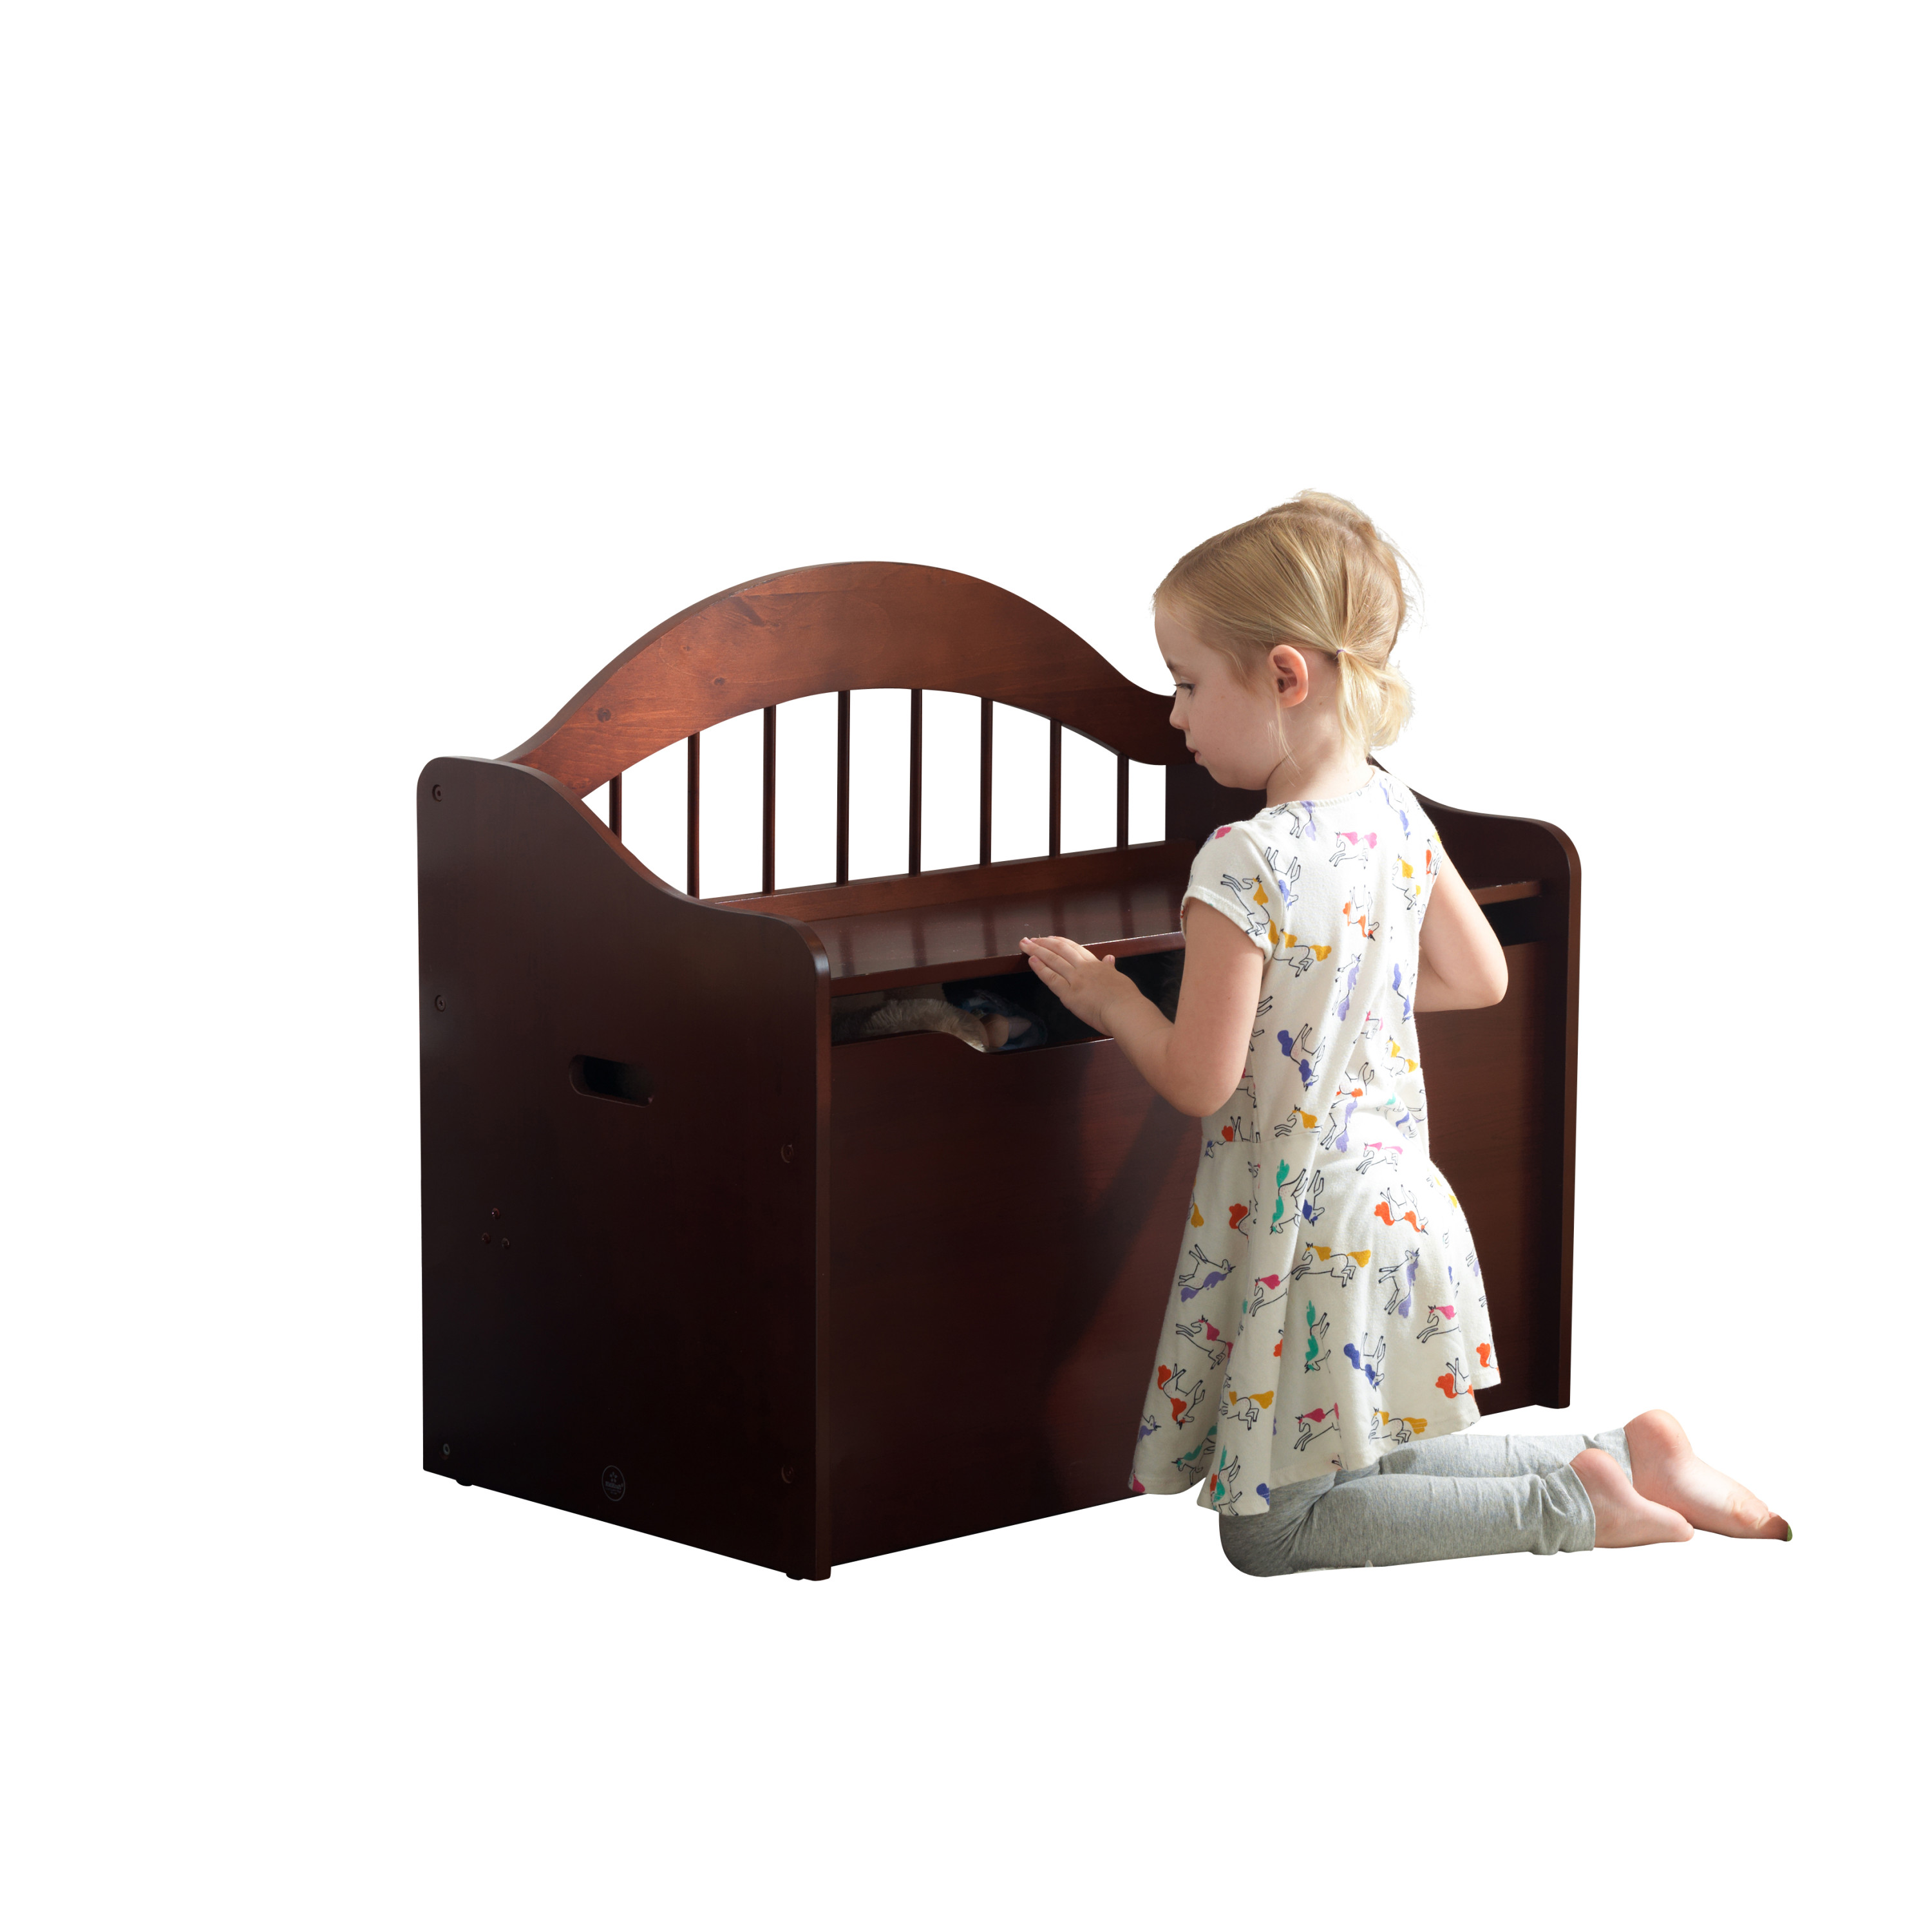 KidKraft Limited Edition Wooden Toy Box and Bench with Handles, Cherry - image 1 of 7